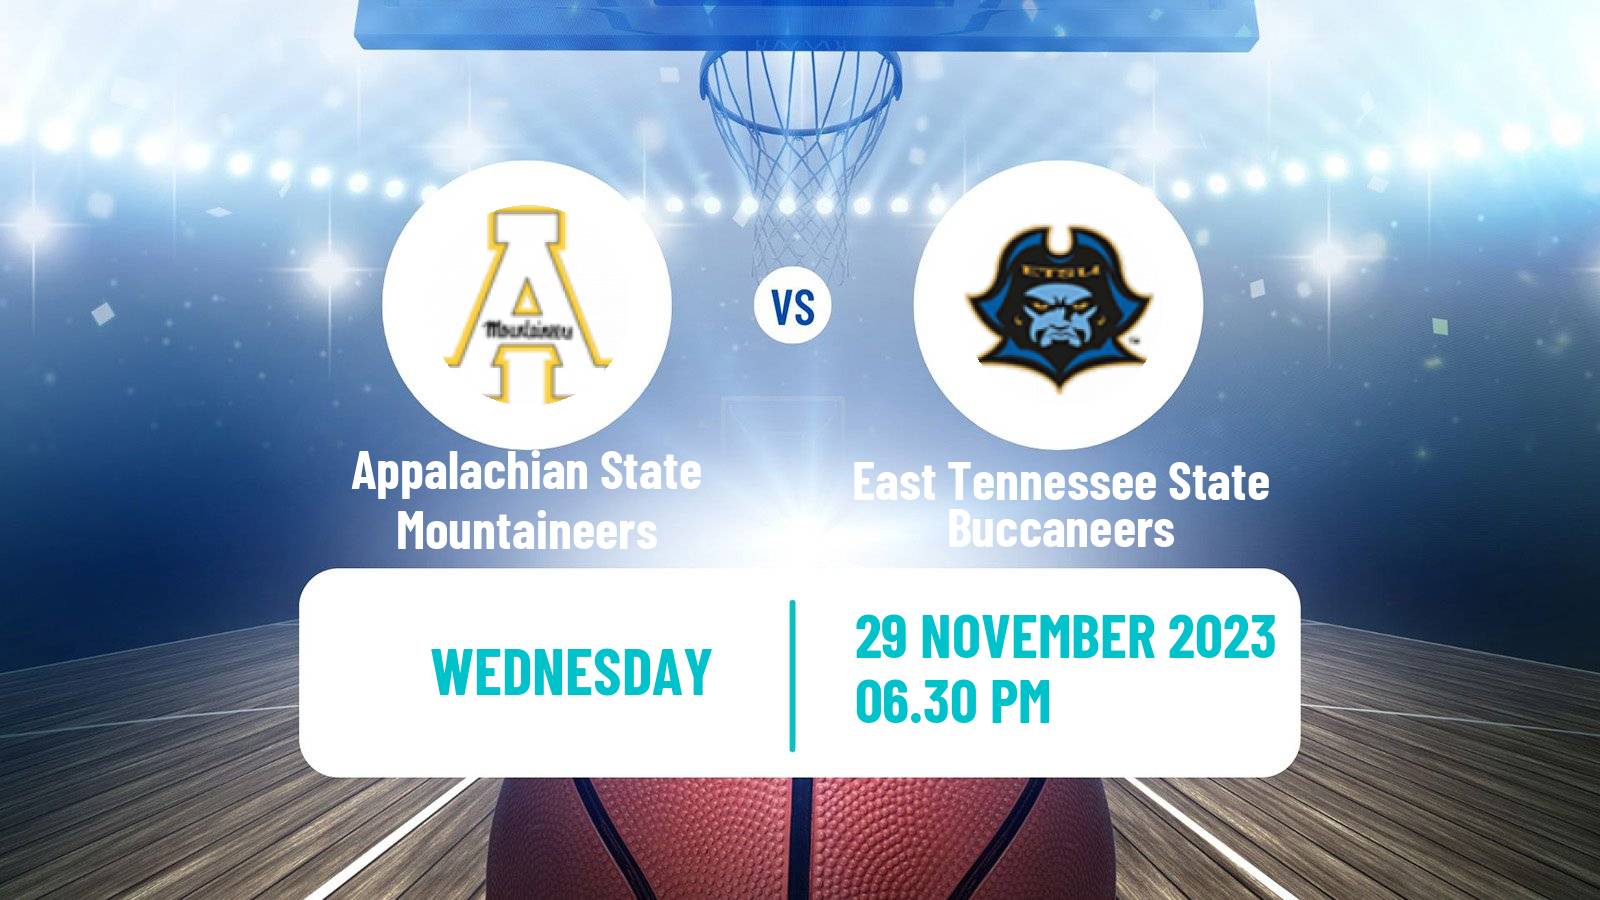 Basketball NCAA College Basketball Appalachian State Mountaineers - East Tennessee State Buccaneers